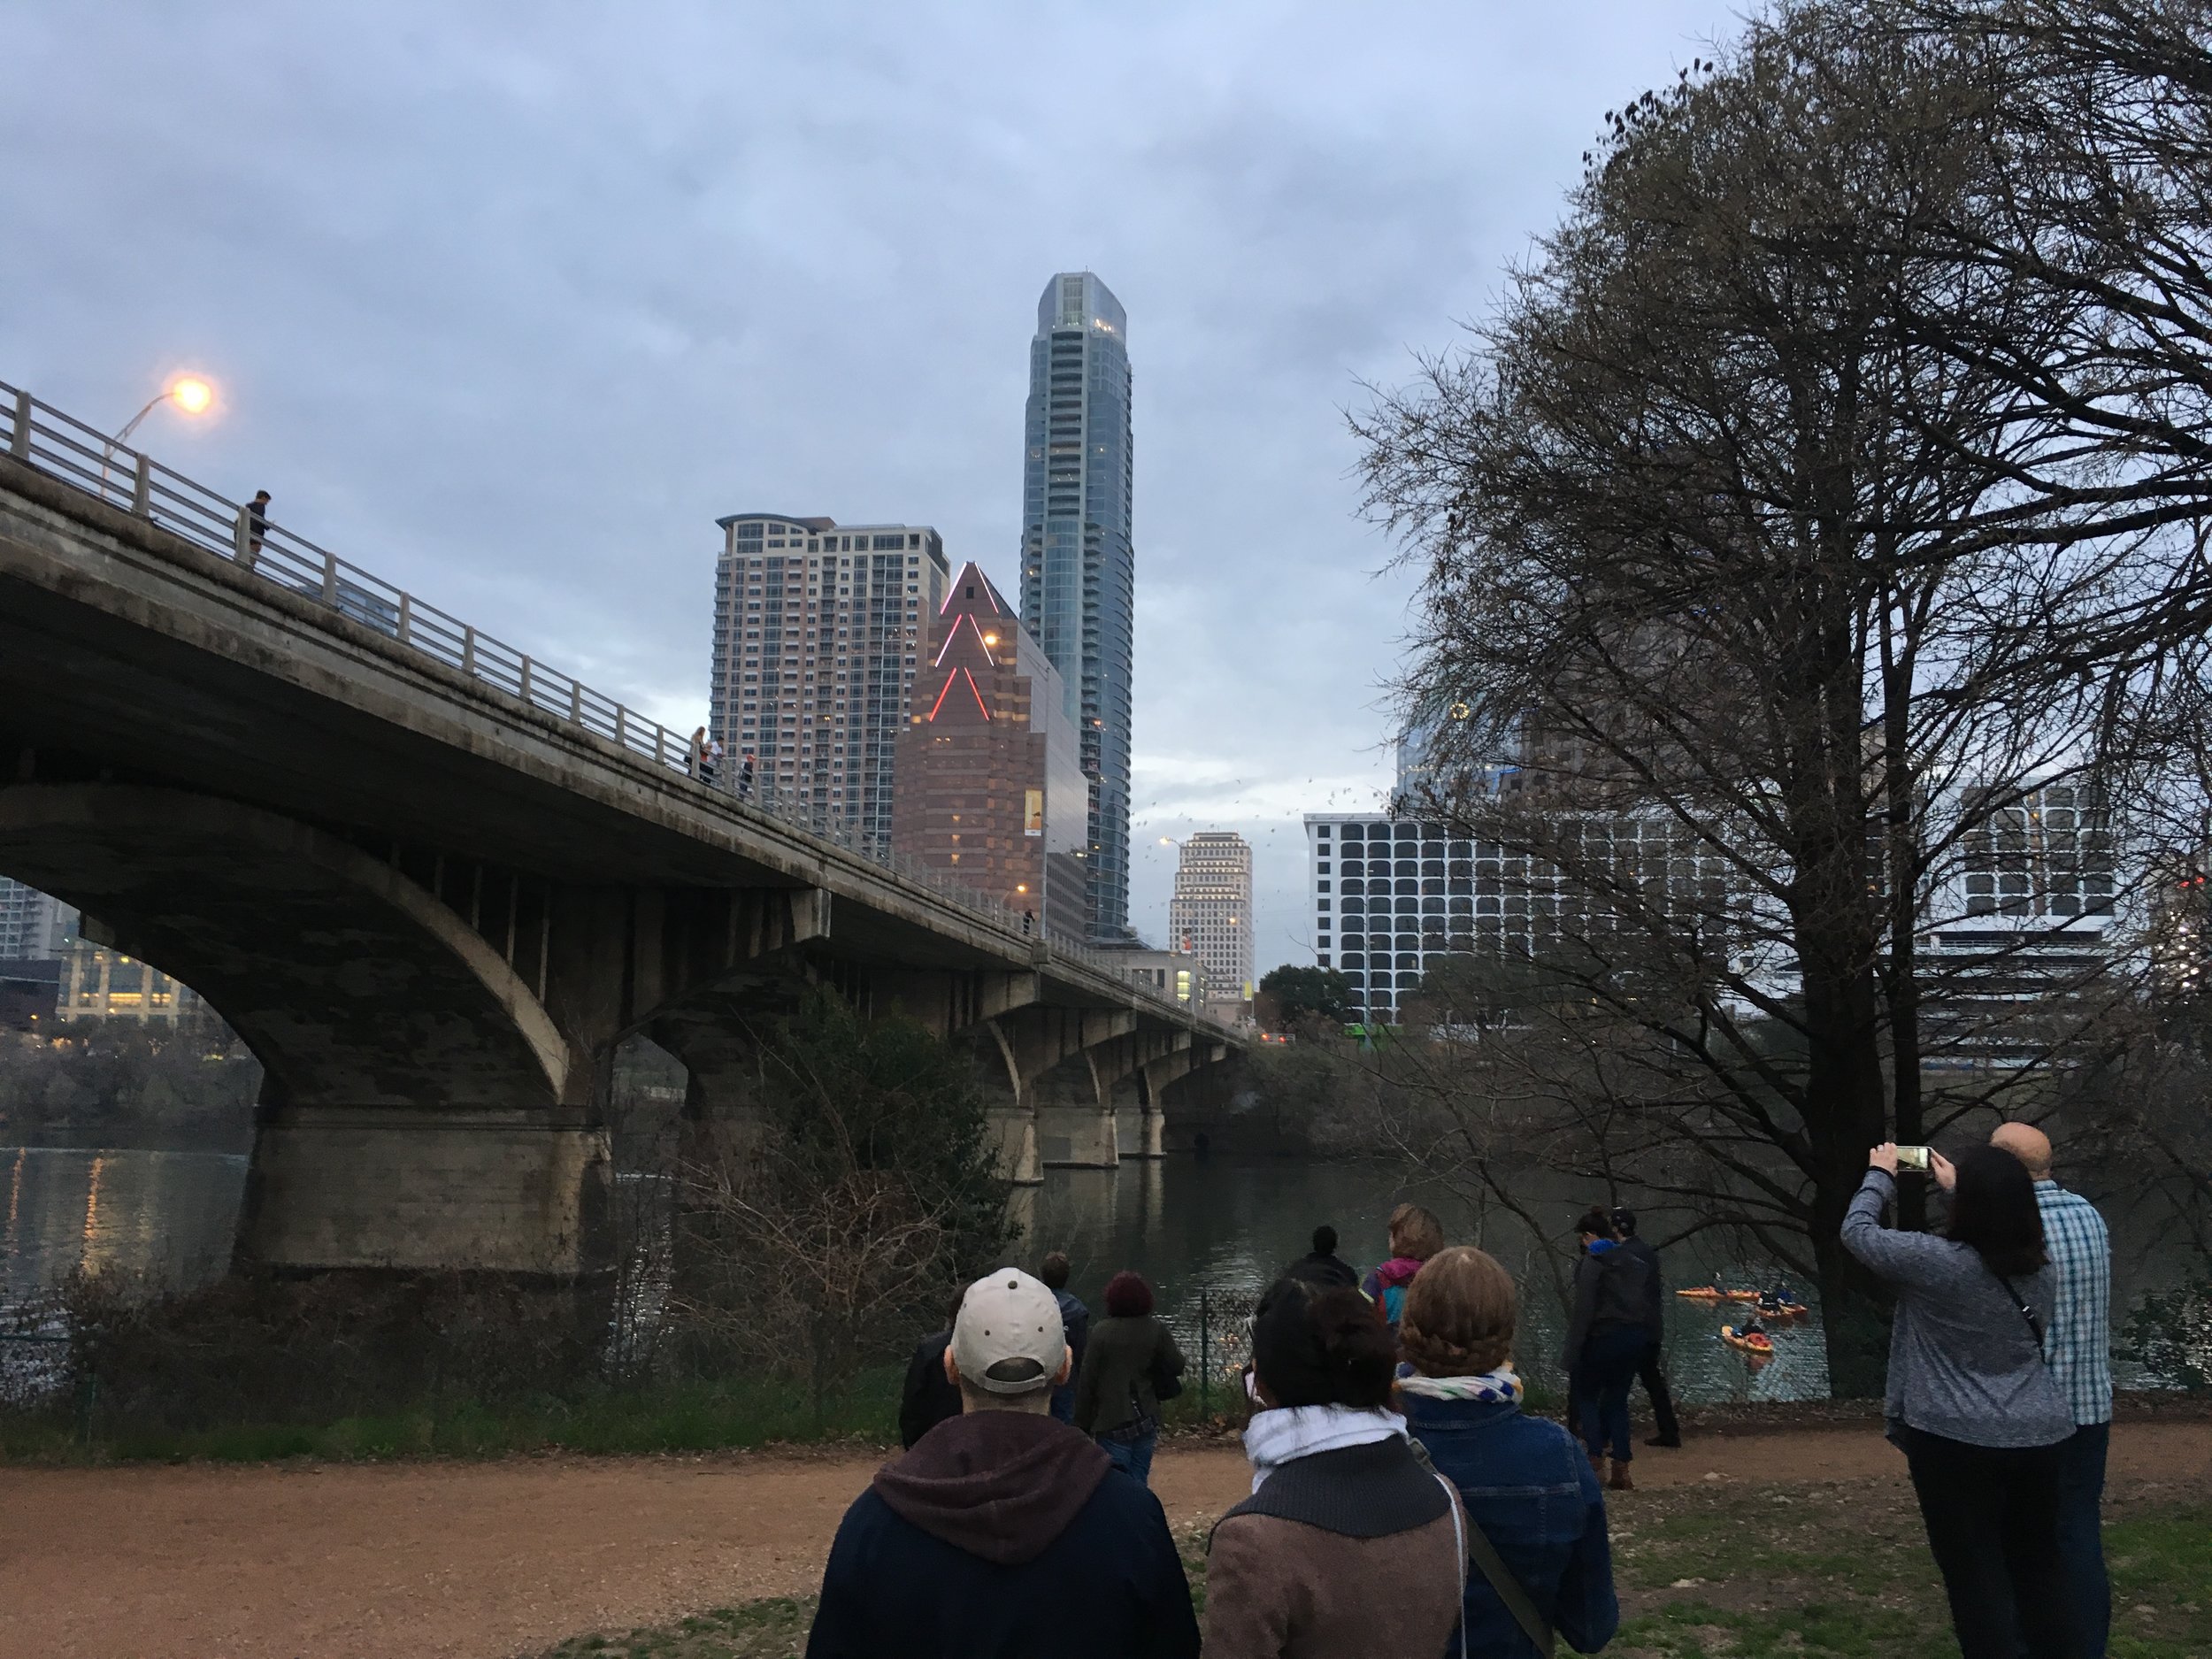  Watching the bats fly from under the Congress Avenue Bridge in Austin. 